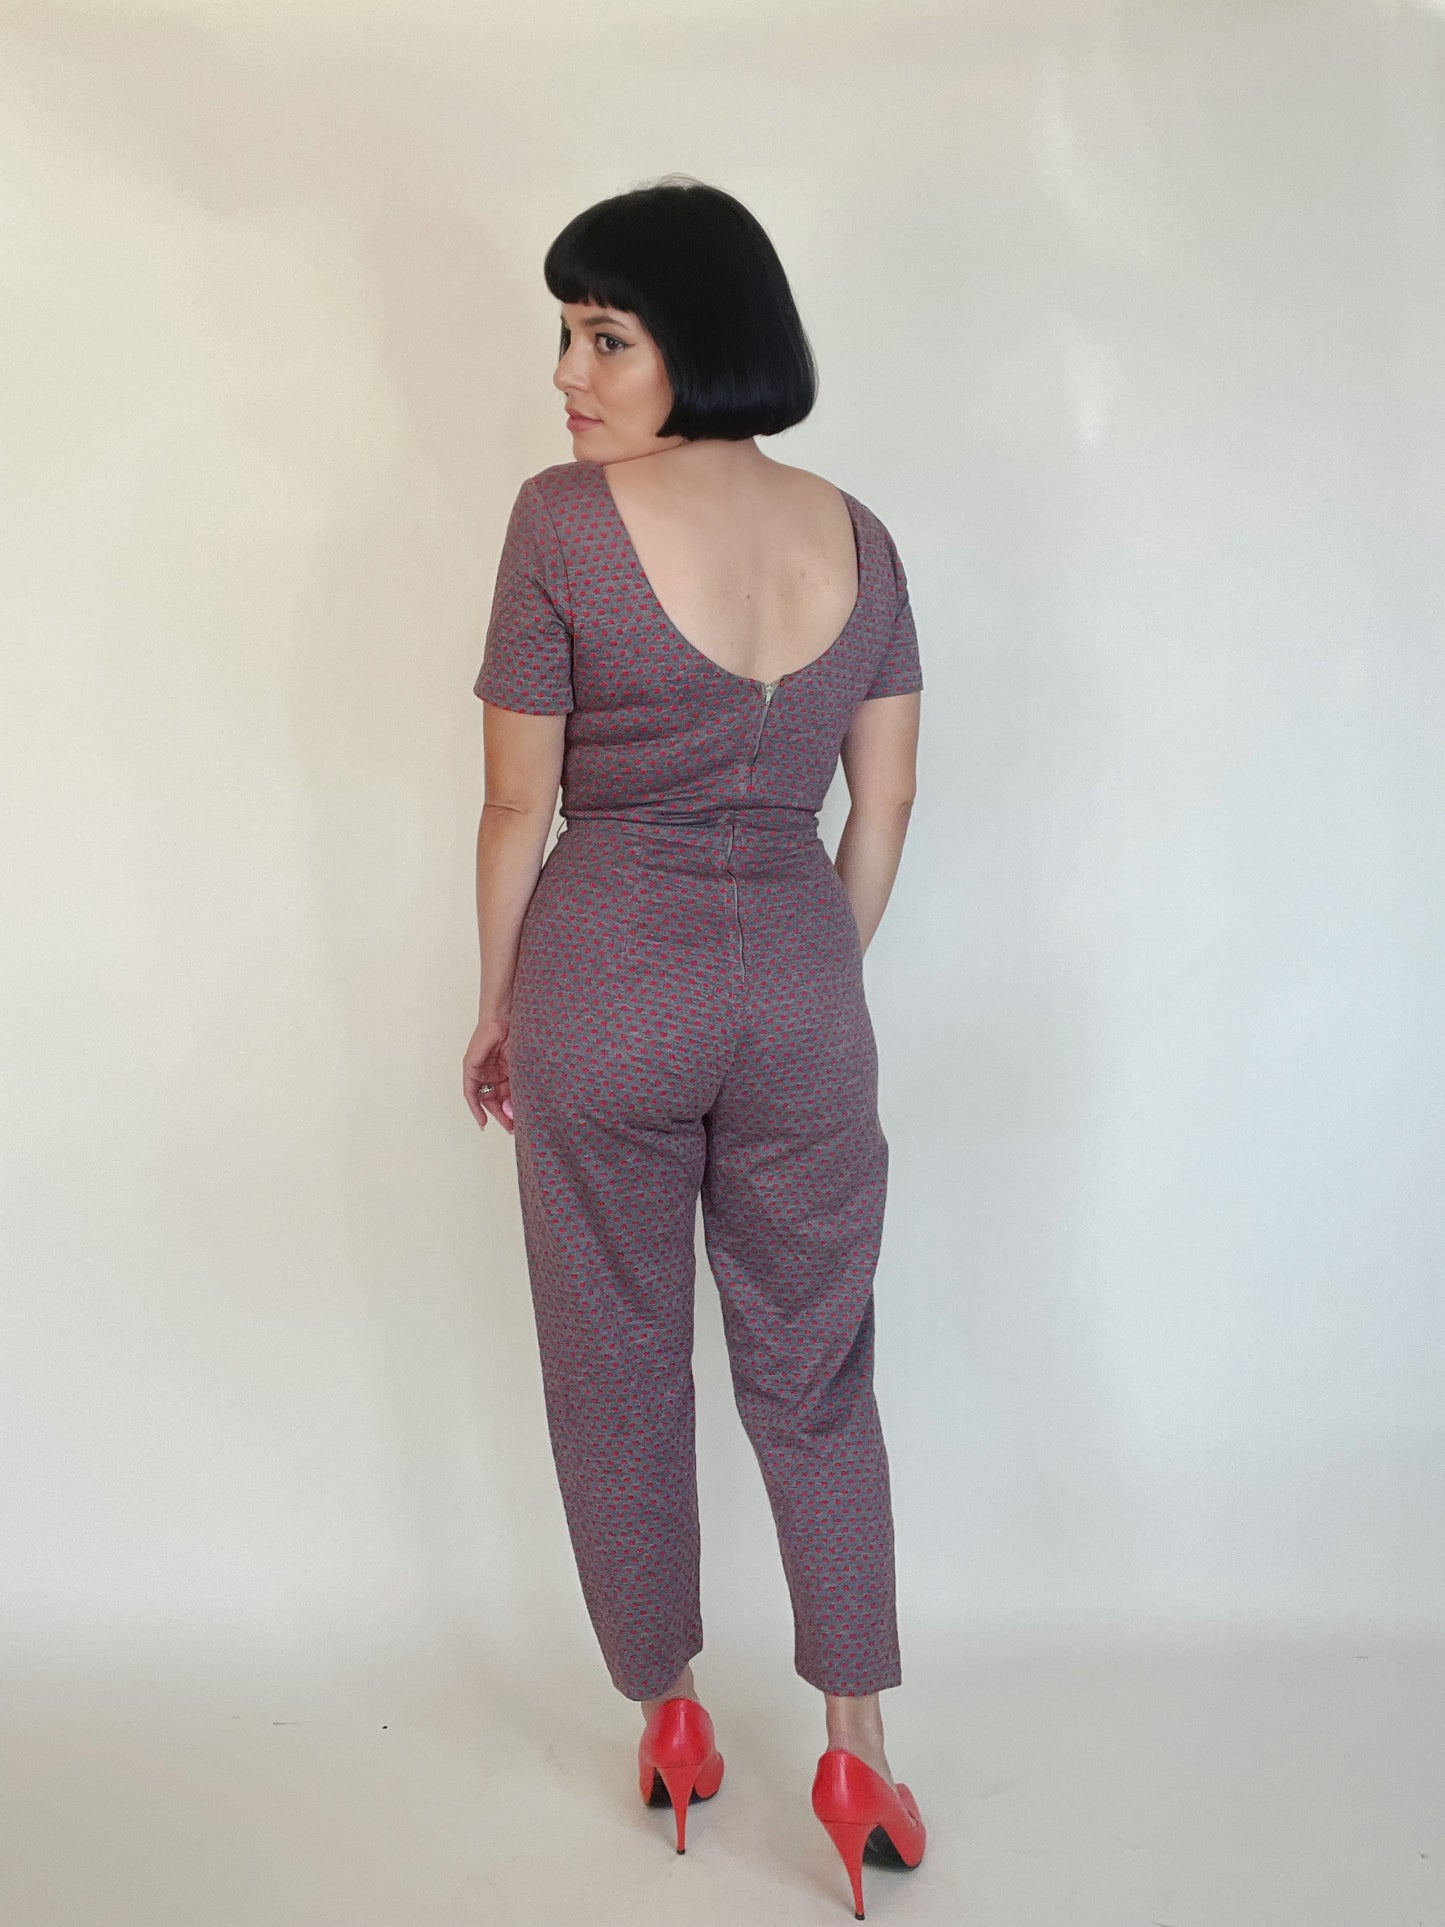 Vintage 50s / 60s Polka Dot Red Grey Stretchy Jumpsuit Fits sizes S-M.